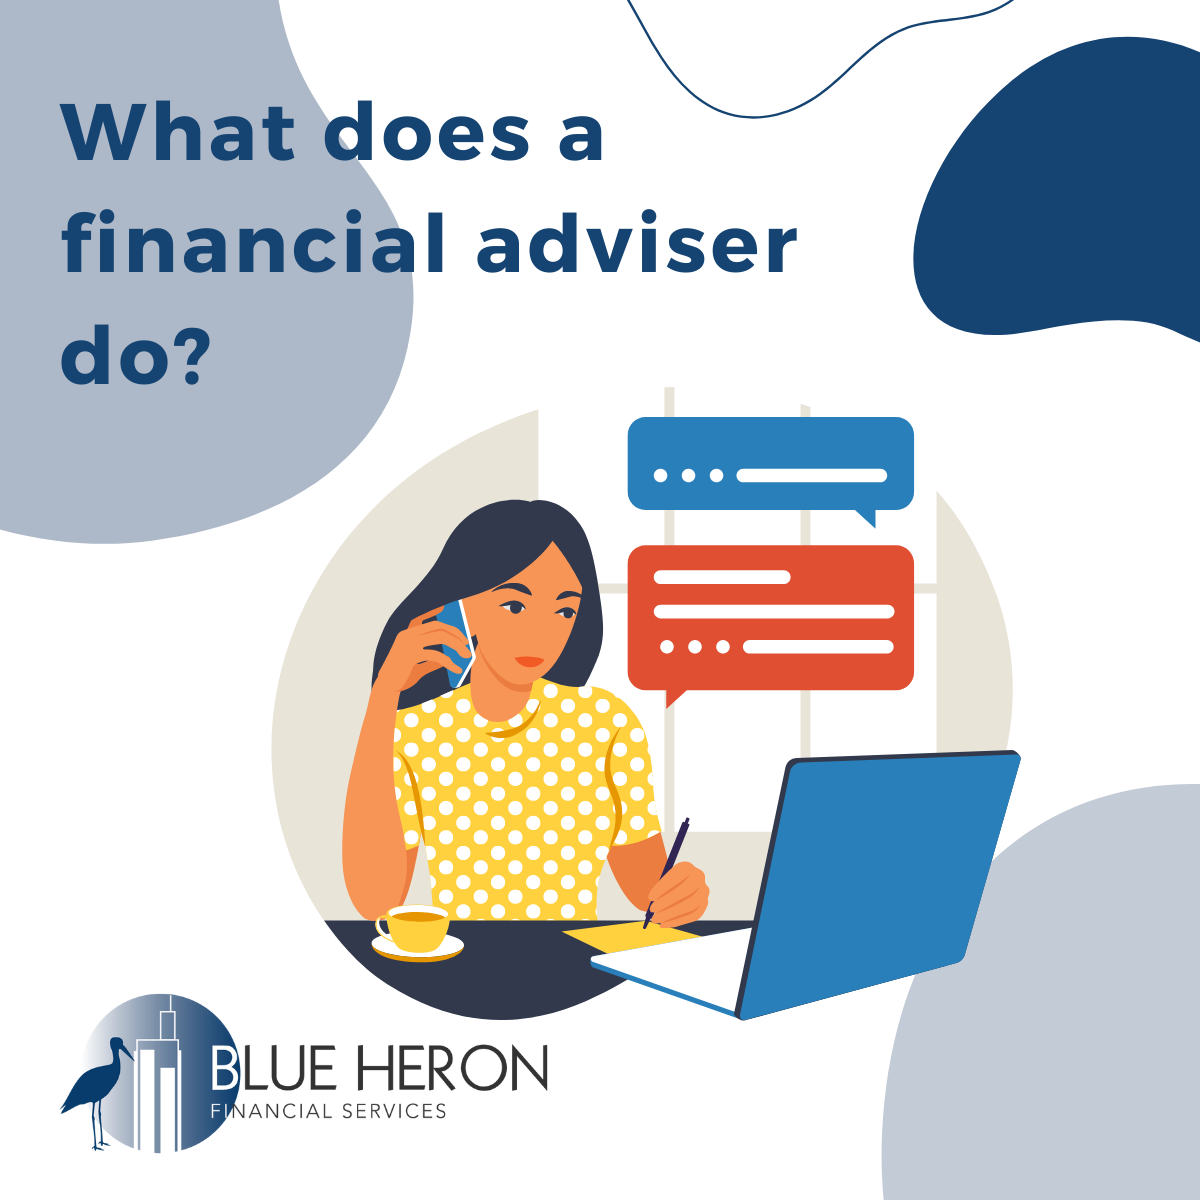 What does a financial adviser do